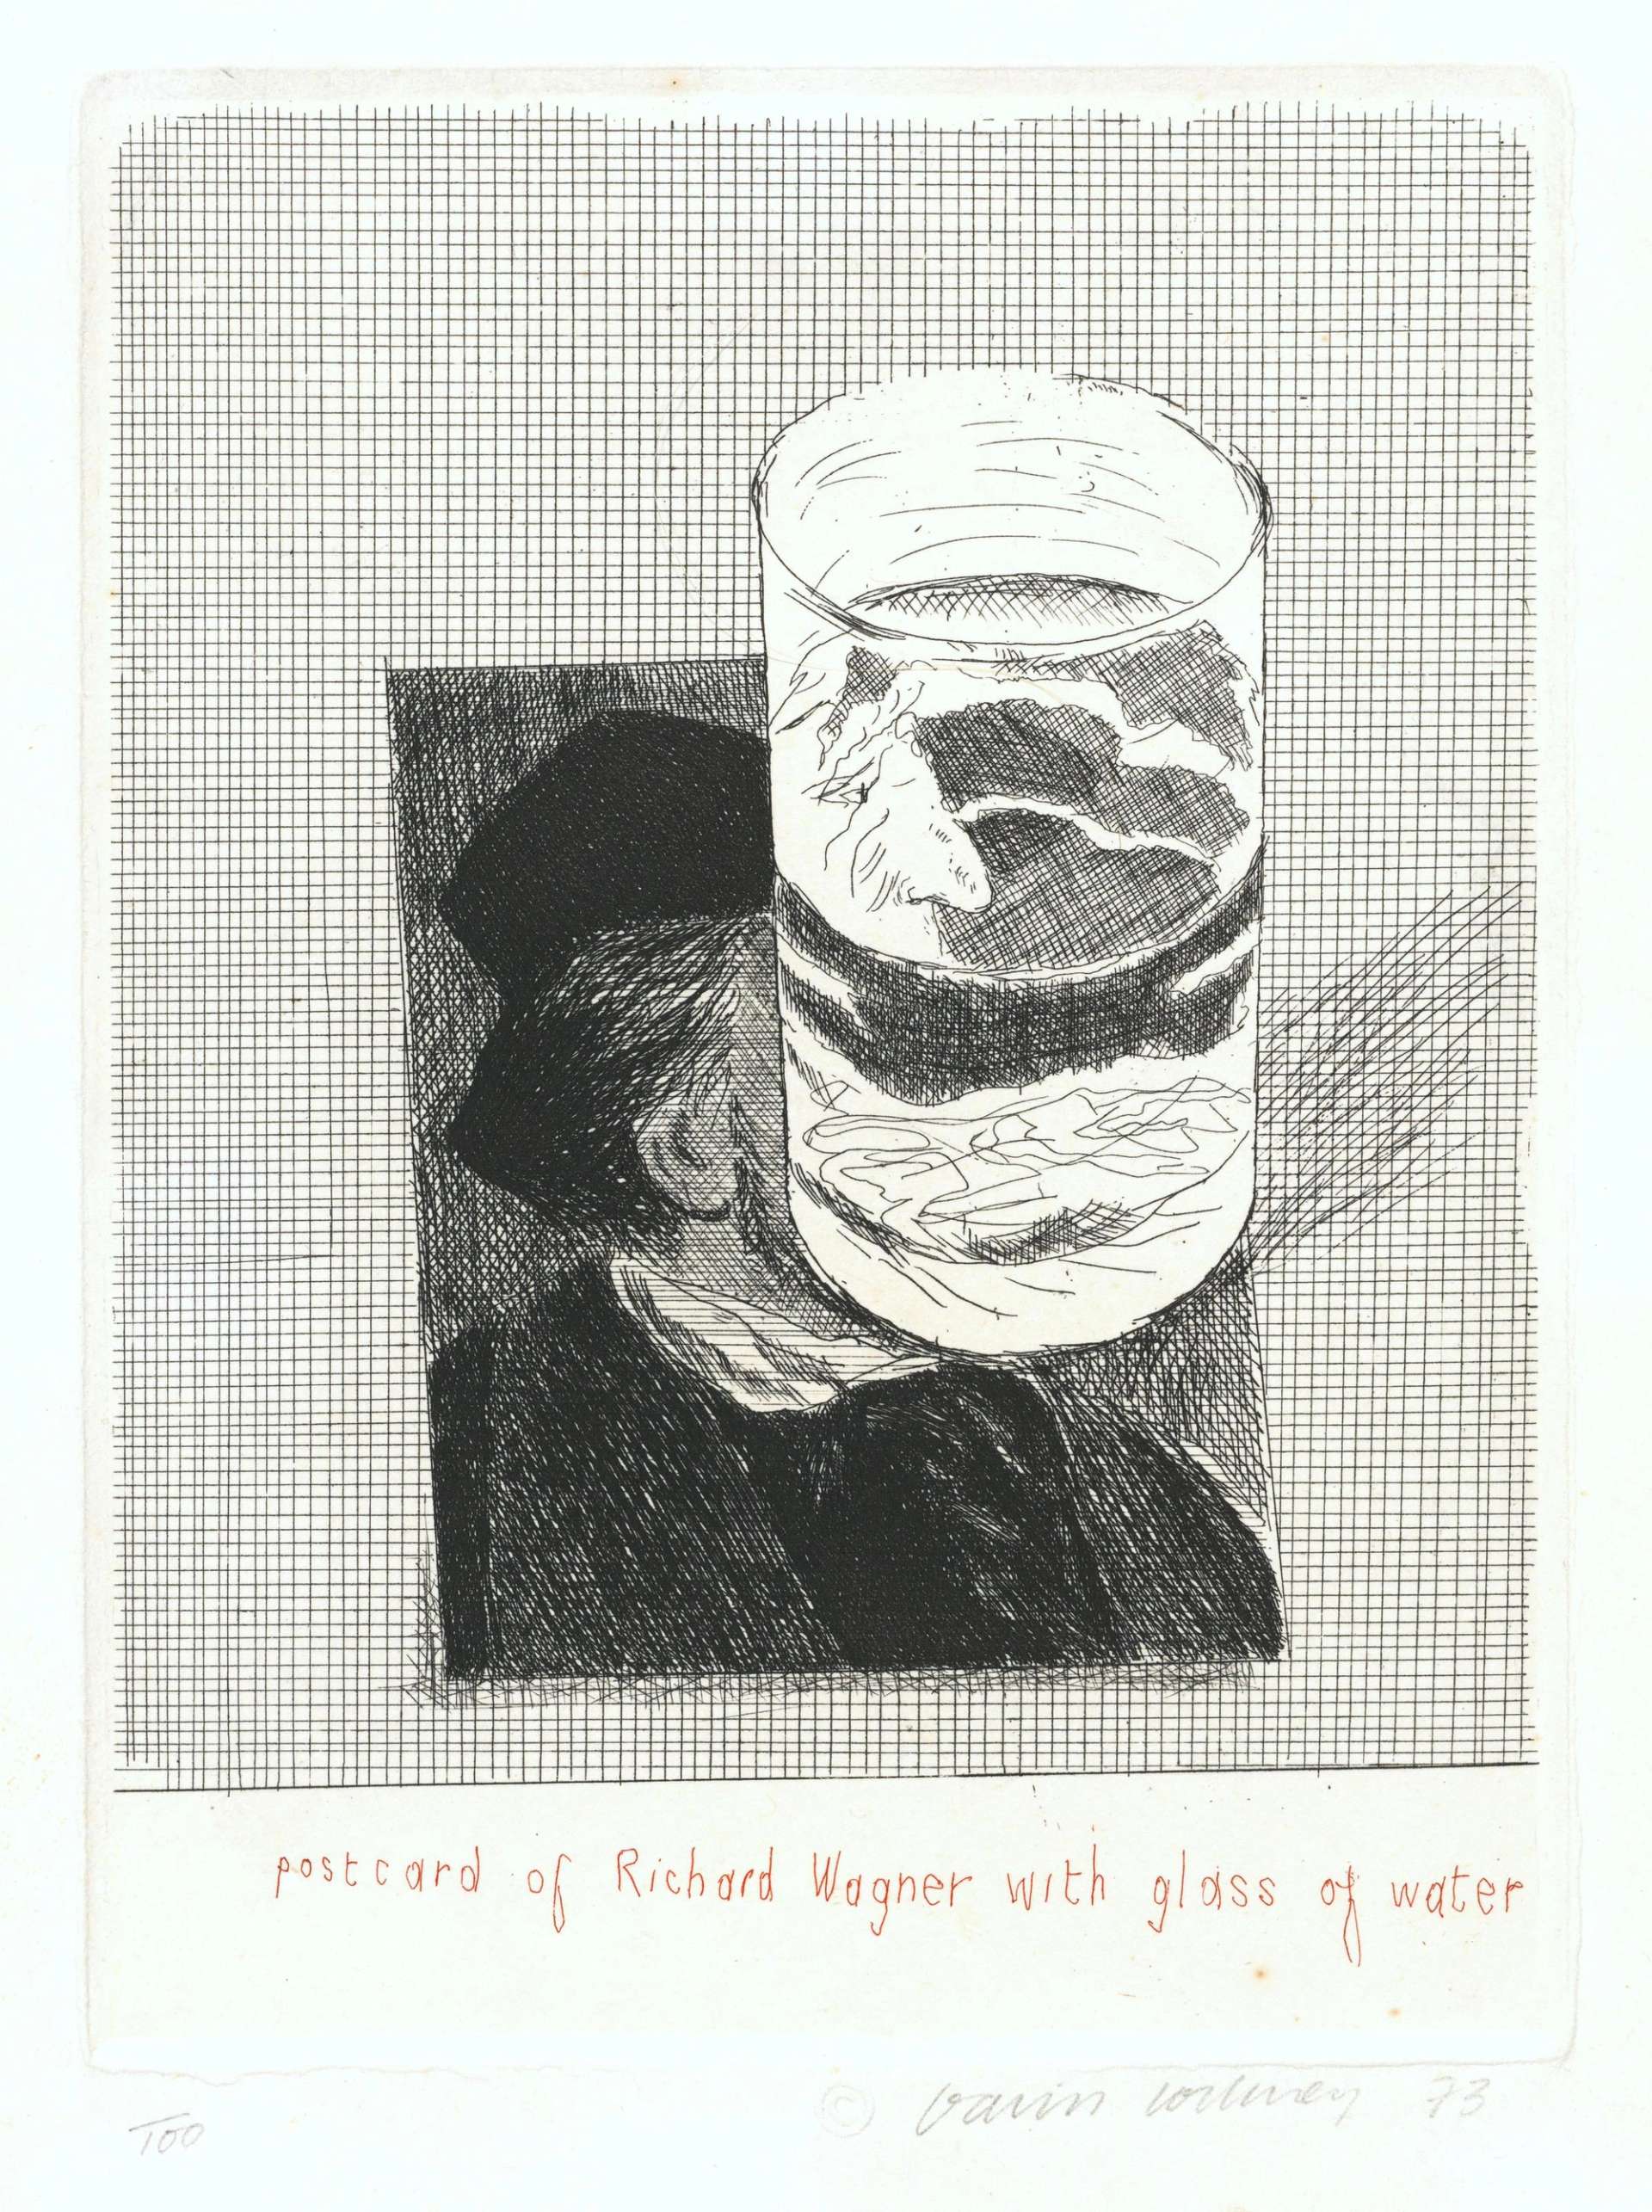 Postcard Of Richard Wagner With A Glass Of Water - Signed Print by David Hockney 1973 - MyArtBroker